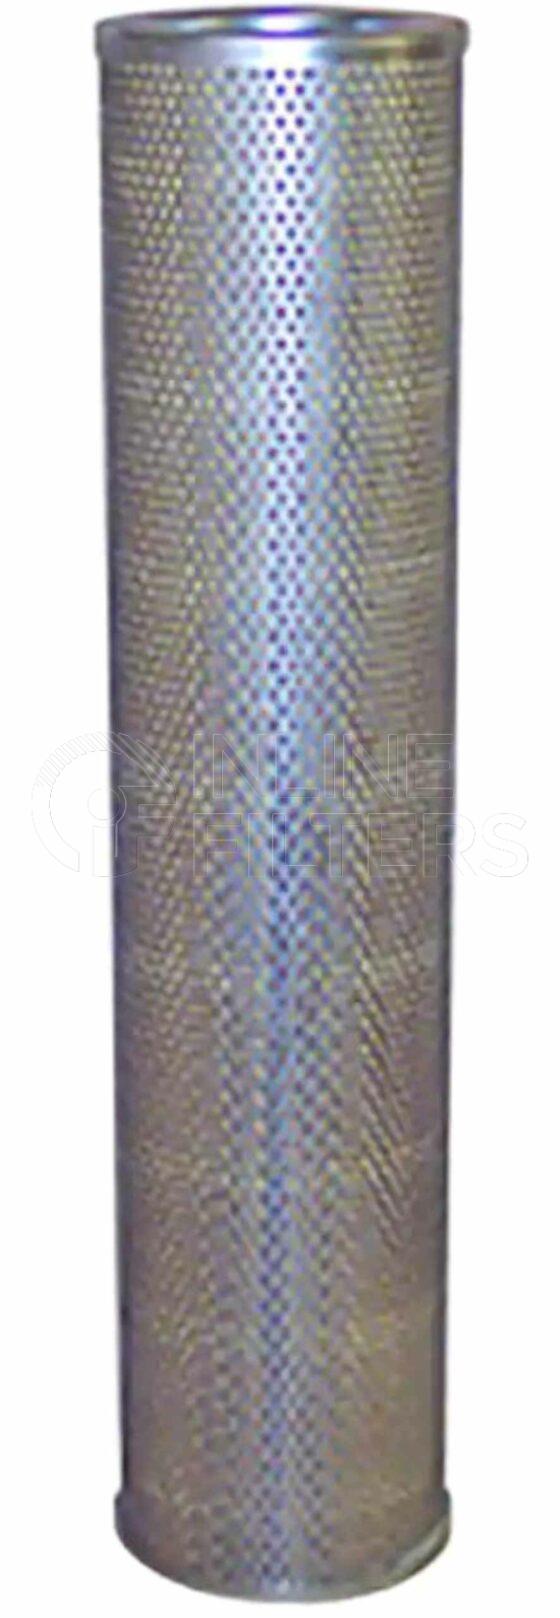 Inline FH56269. Hydraulic Filter Product – Cartridge – Round Product Hydraulic filter product